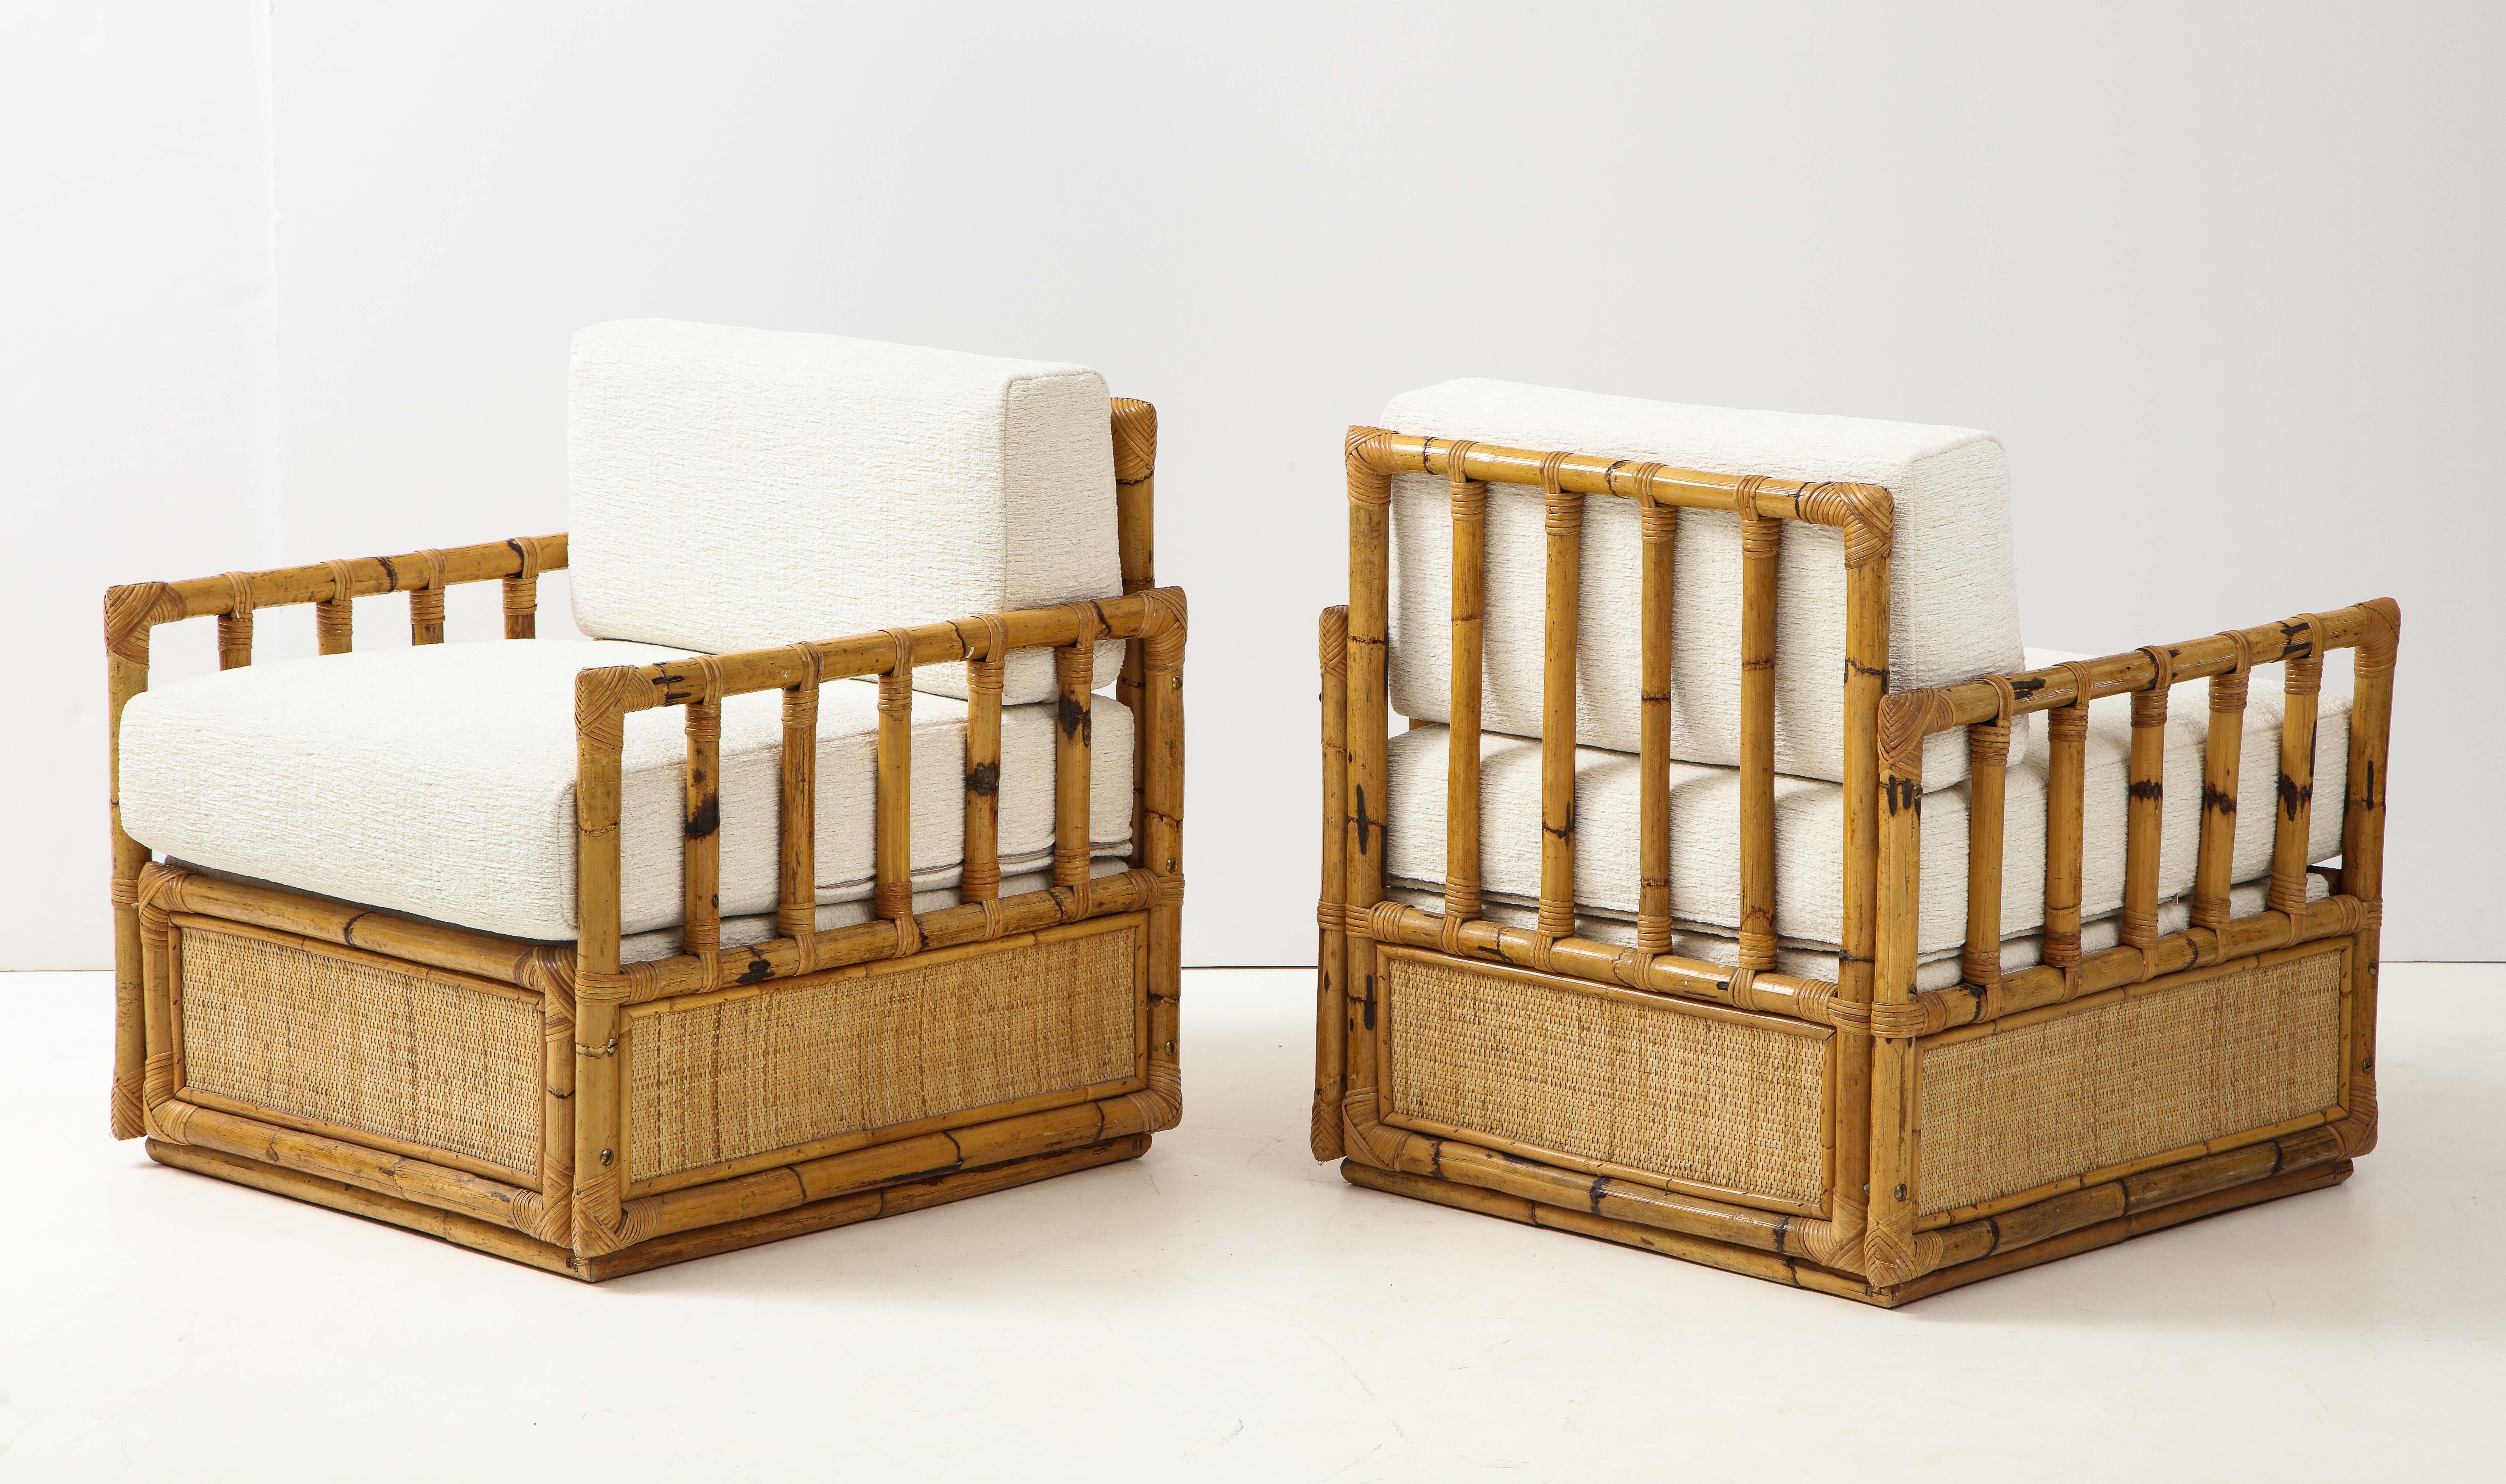 Rare pair of bamboo and rattan lounge chairs by Vivai del Sud, circa 1970. These lounge chairs are in excellent condition and have been newly updated with seat and back cushions upholstered in Ivory boucle fabric by Dedar. Vivai del Sud was a Roman